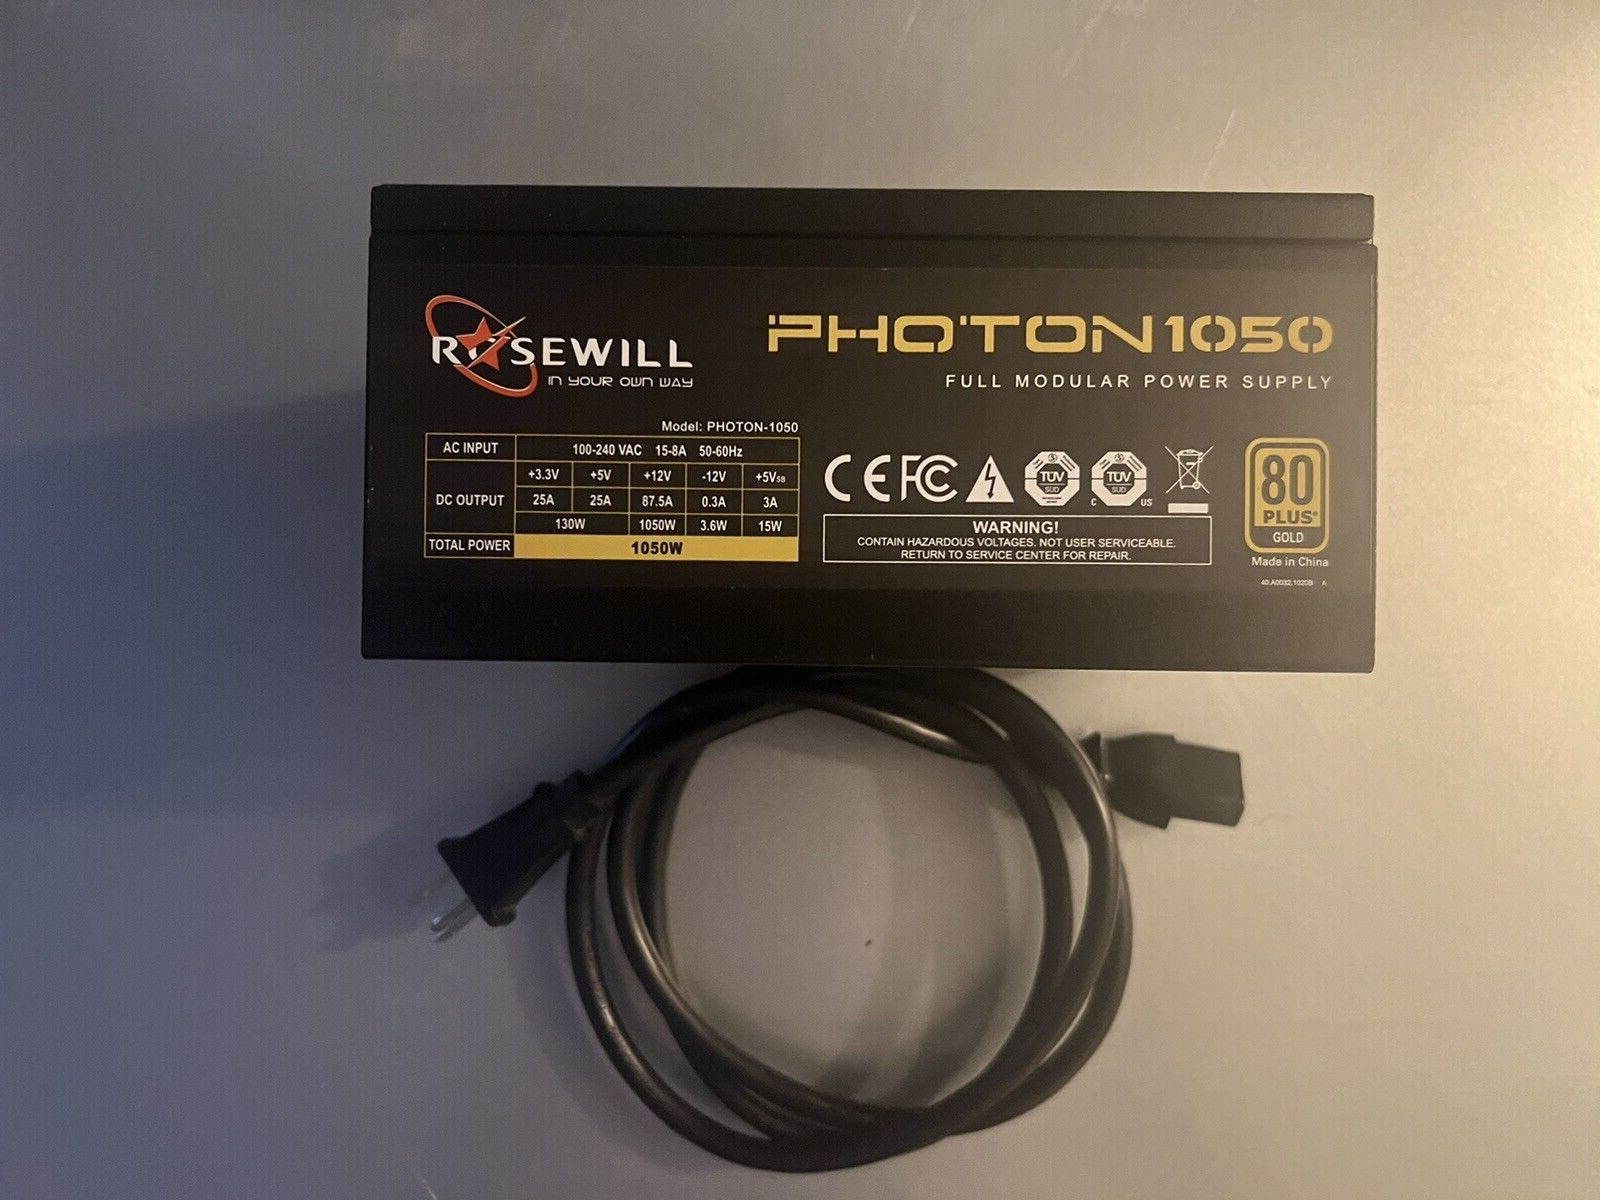 Rosewil PHOTON 1050W Full Modular Power Supply 80 Plus Gold  (PSU Only)